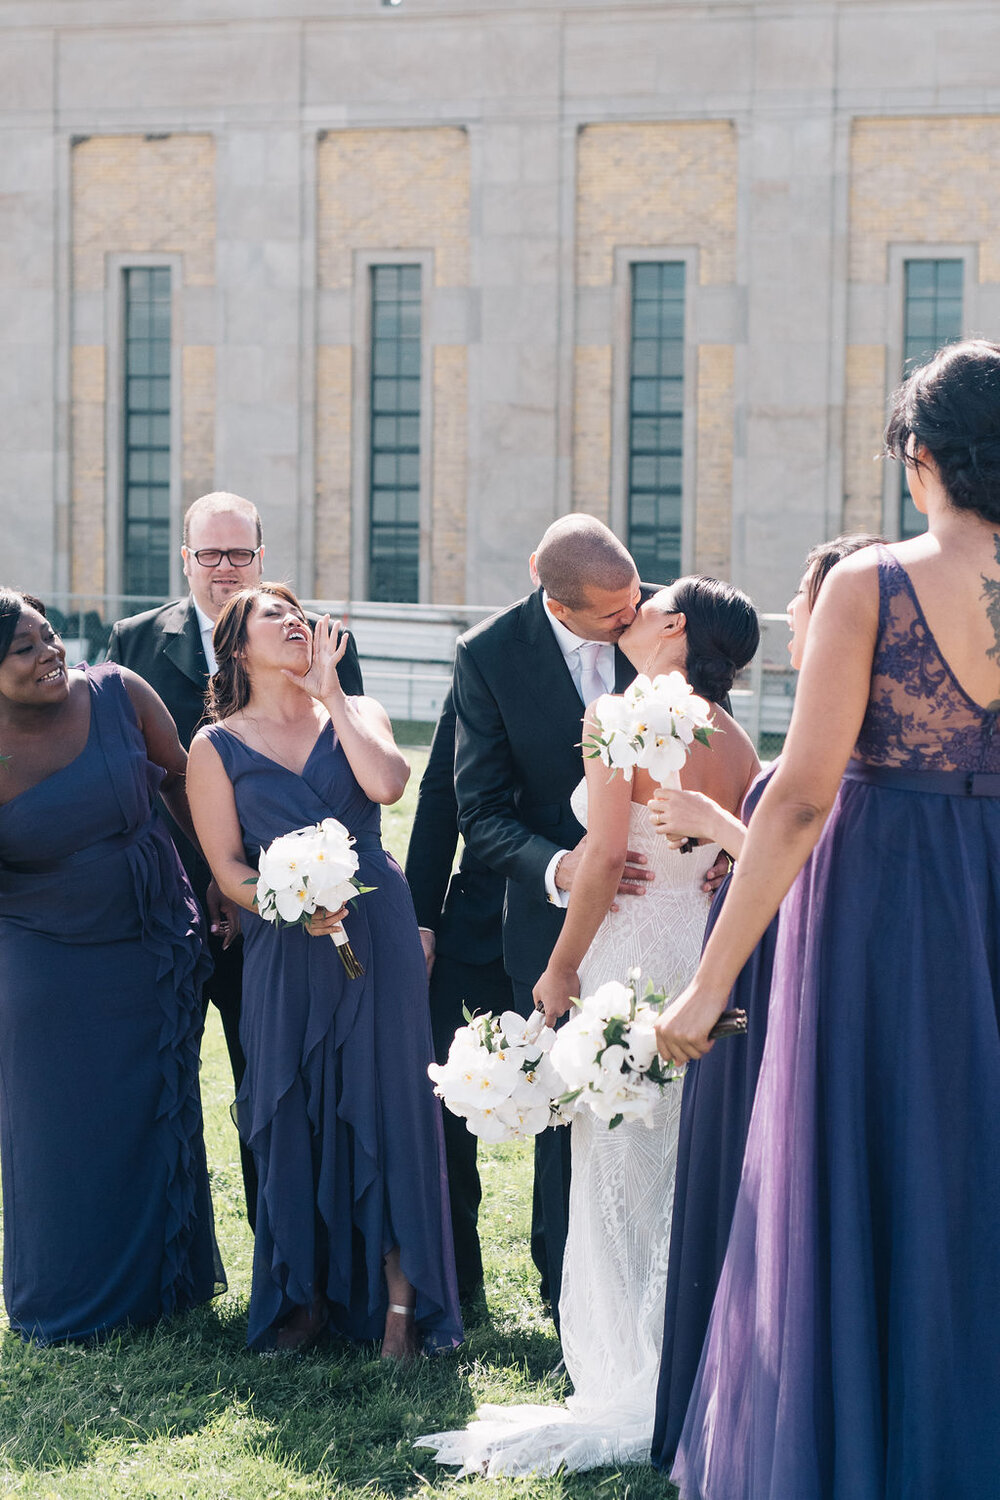 Toronto bride and groom kiss as bridal party cheers them on!